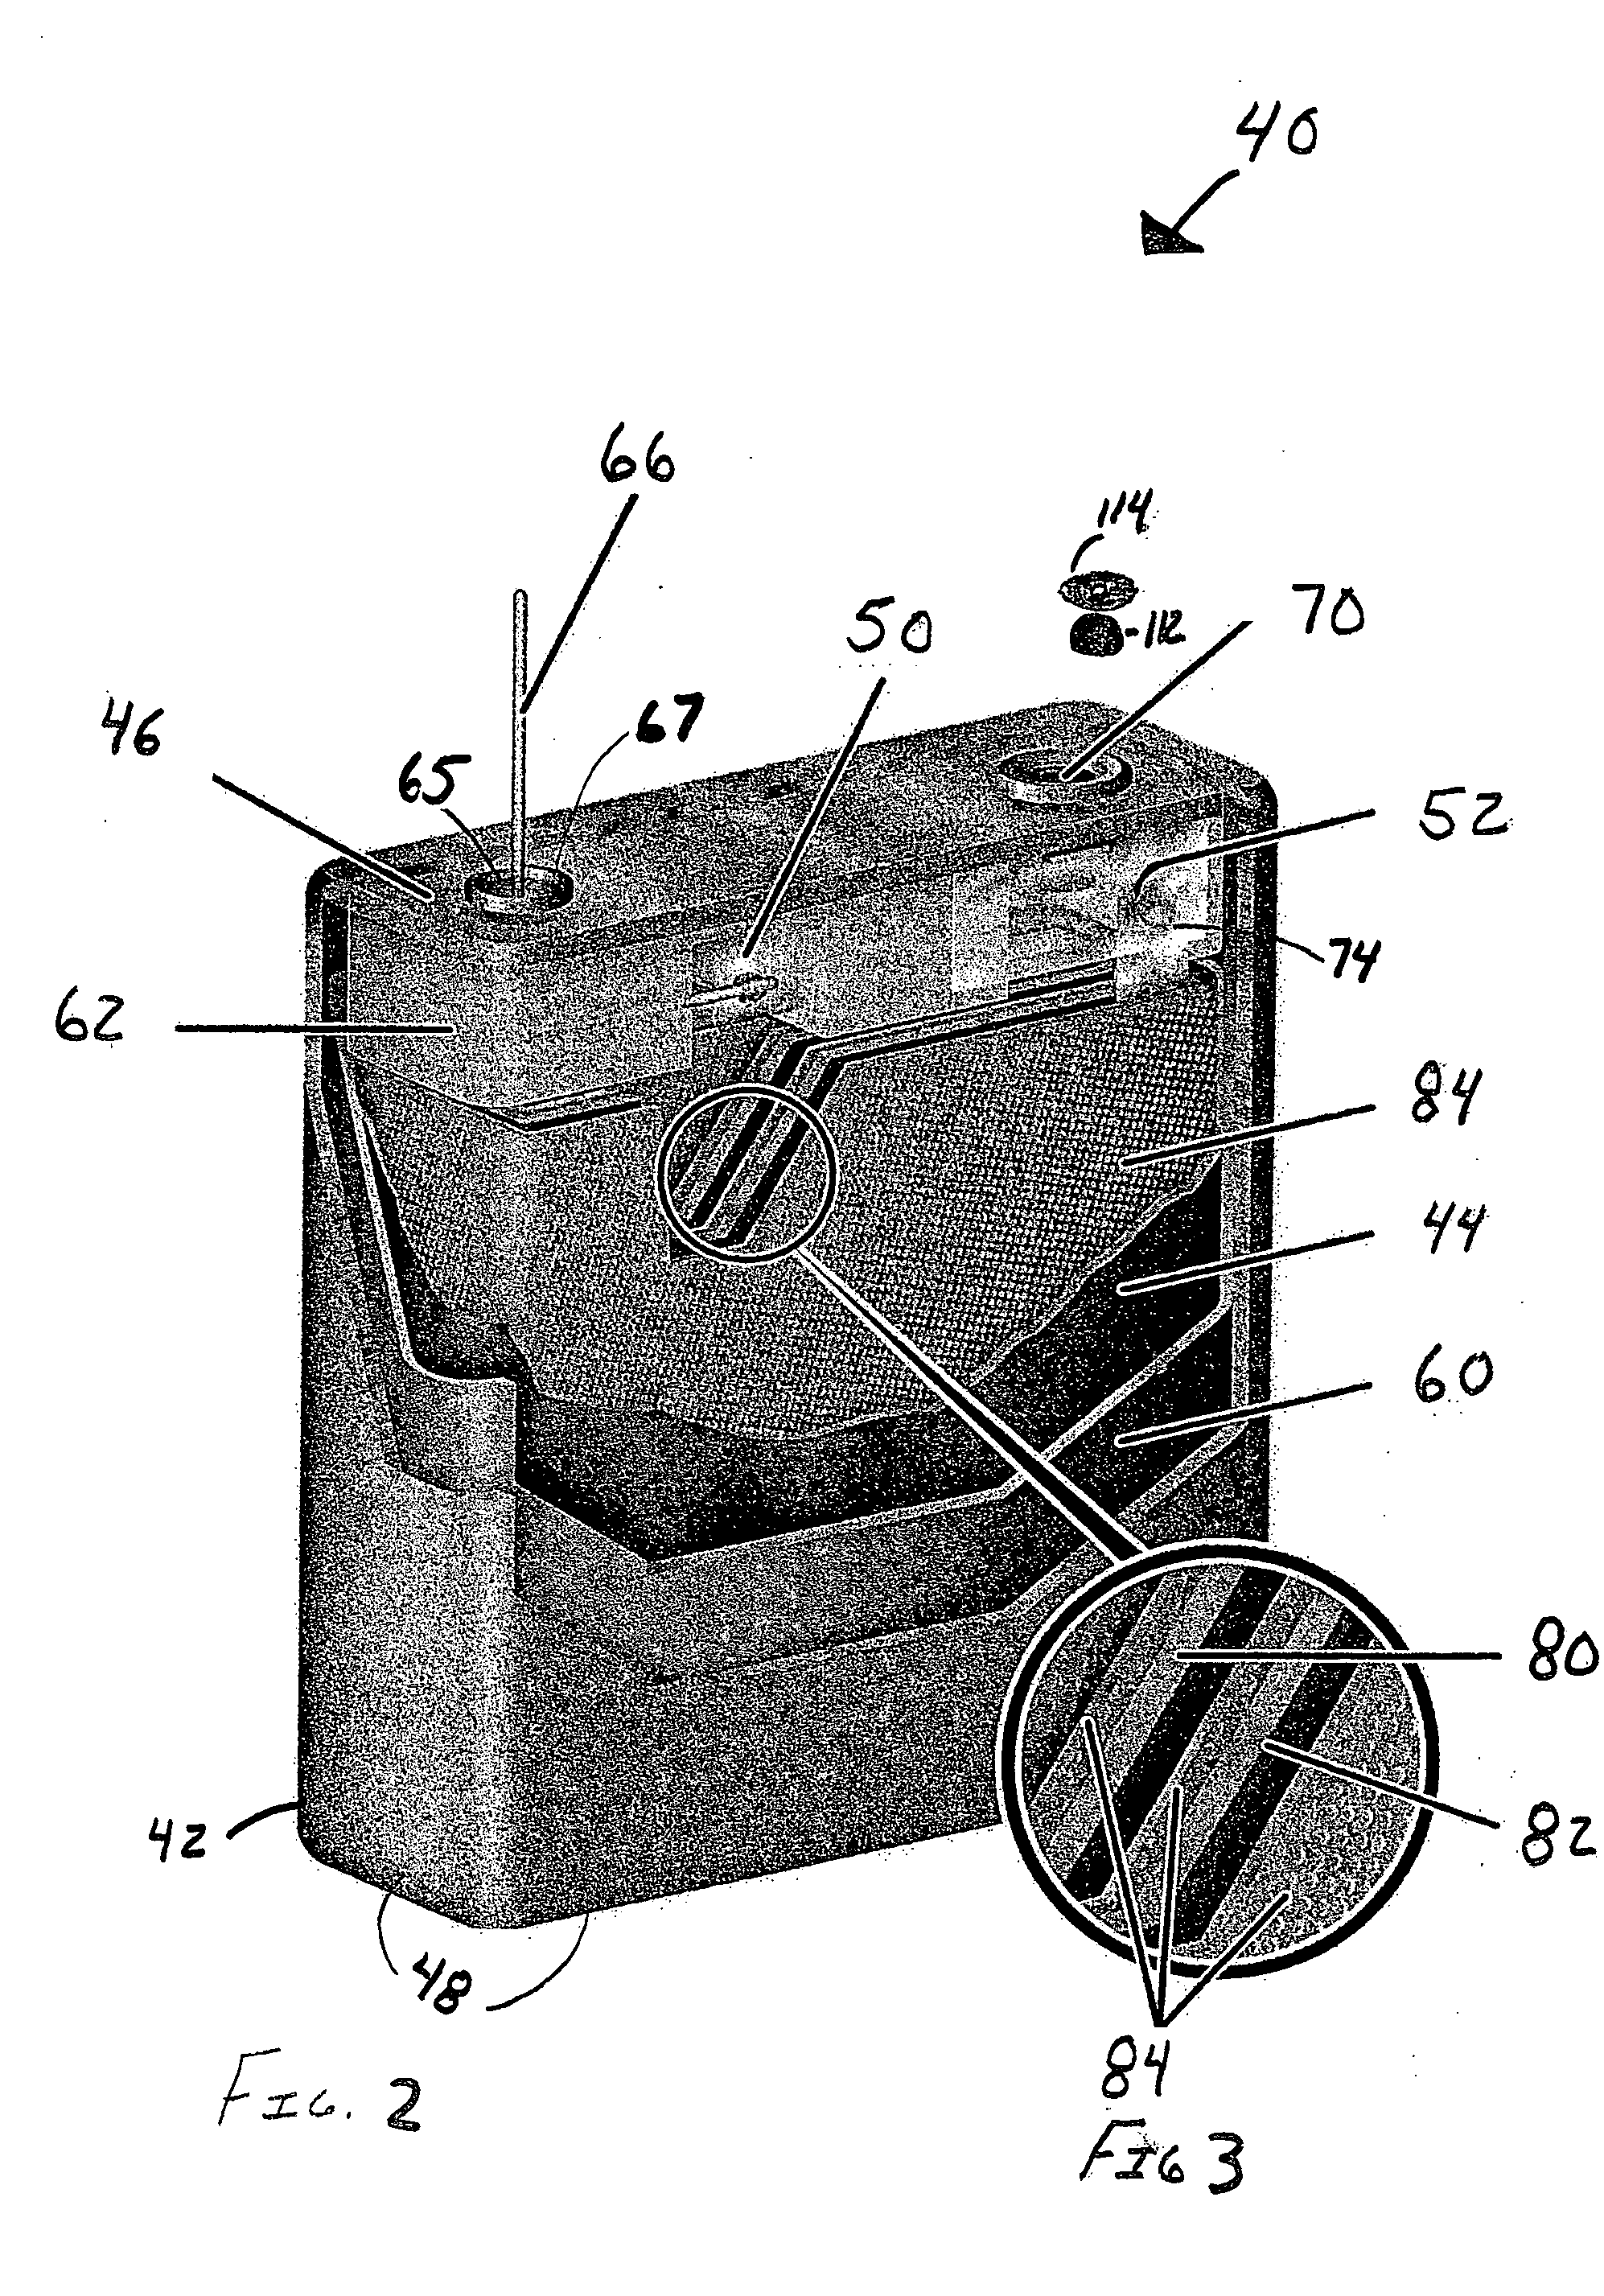 Headspace insulator for electrochemical cells